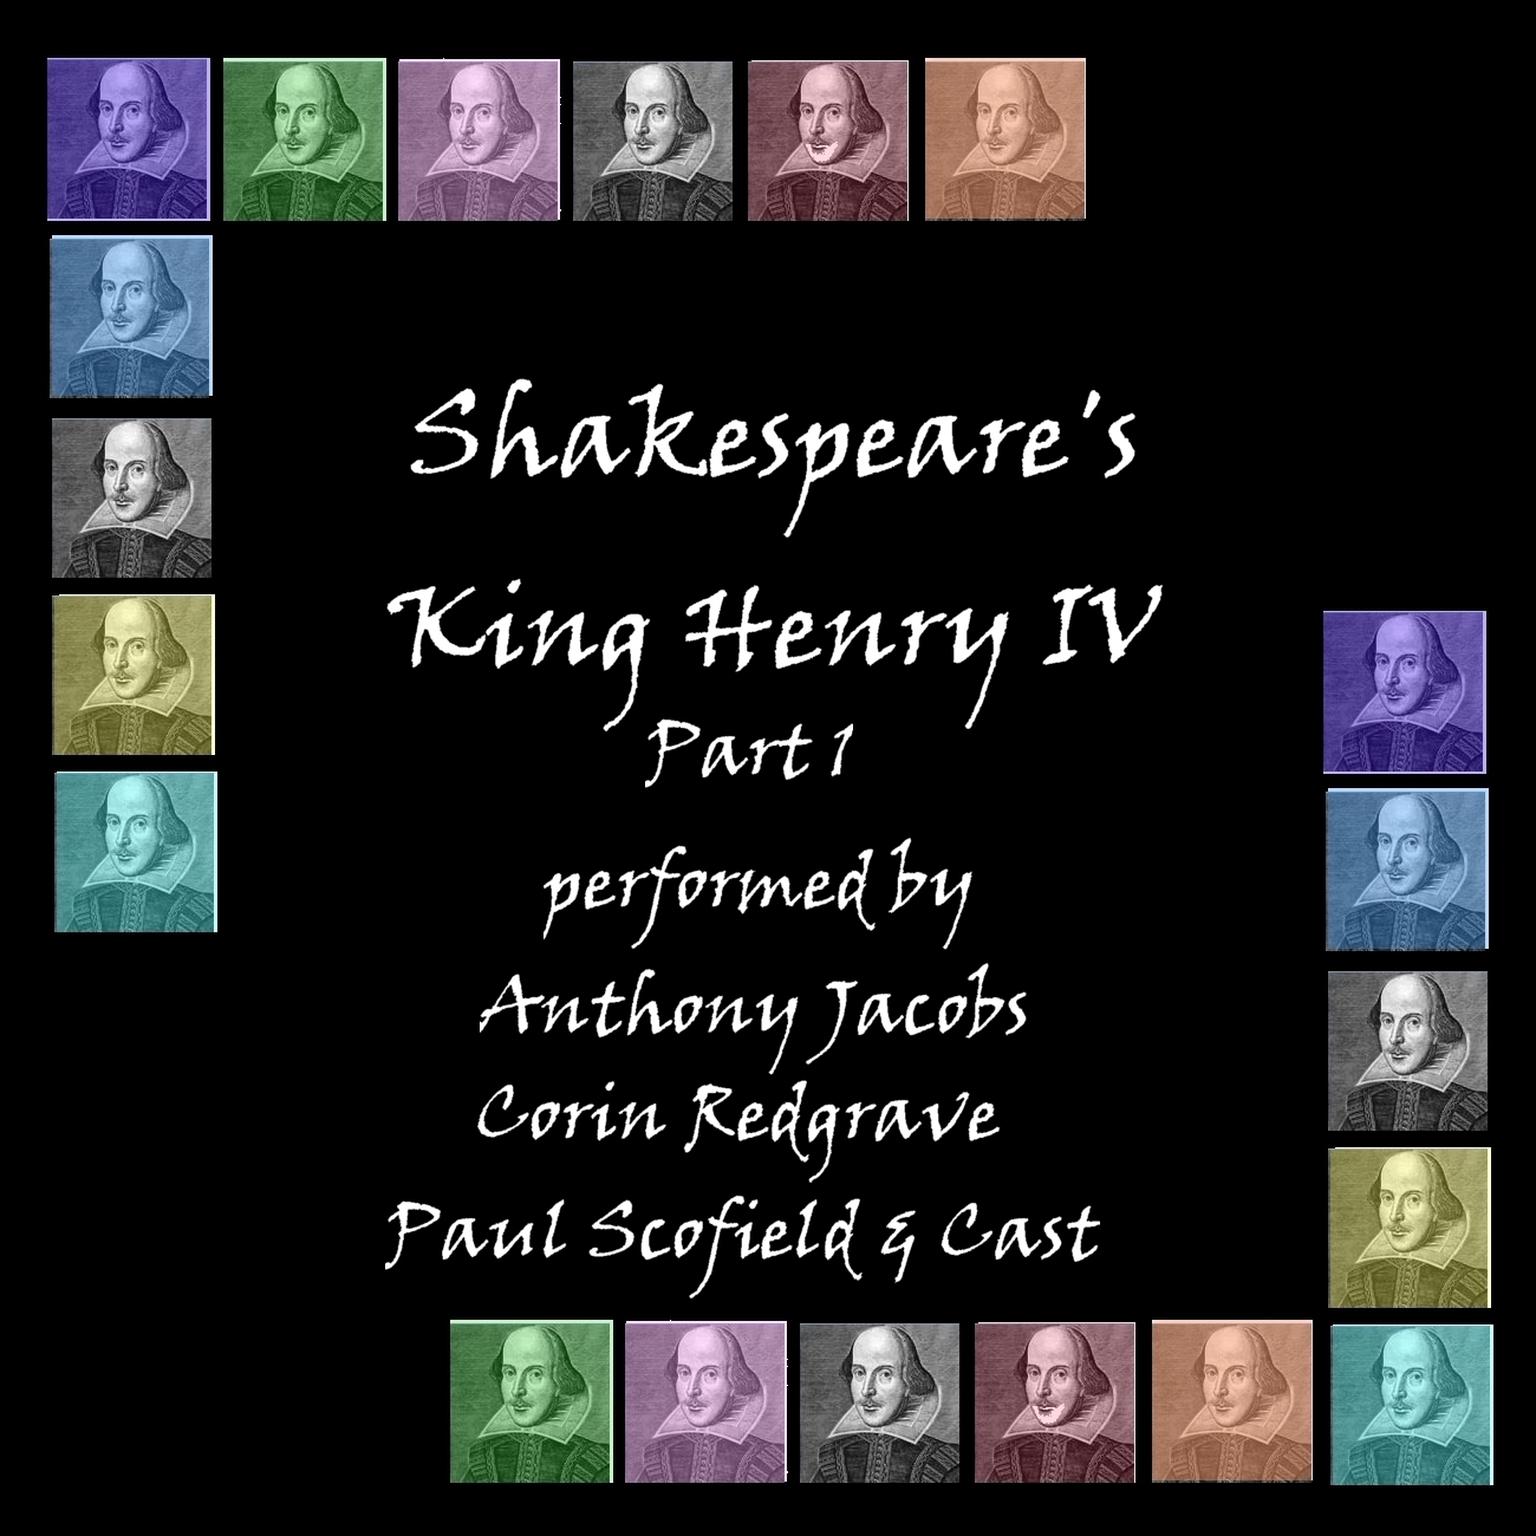 Henry IV, Part 1 Audiobook, by William Shakespeare